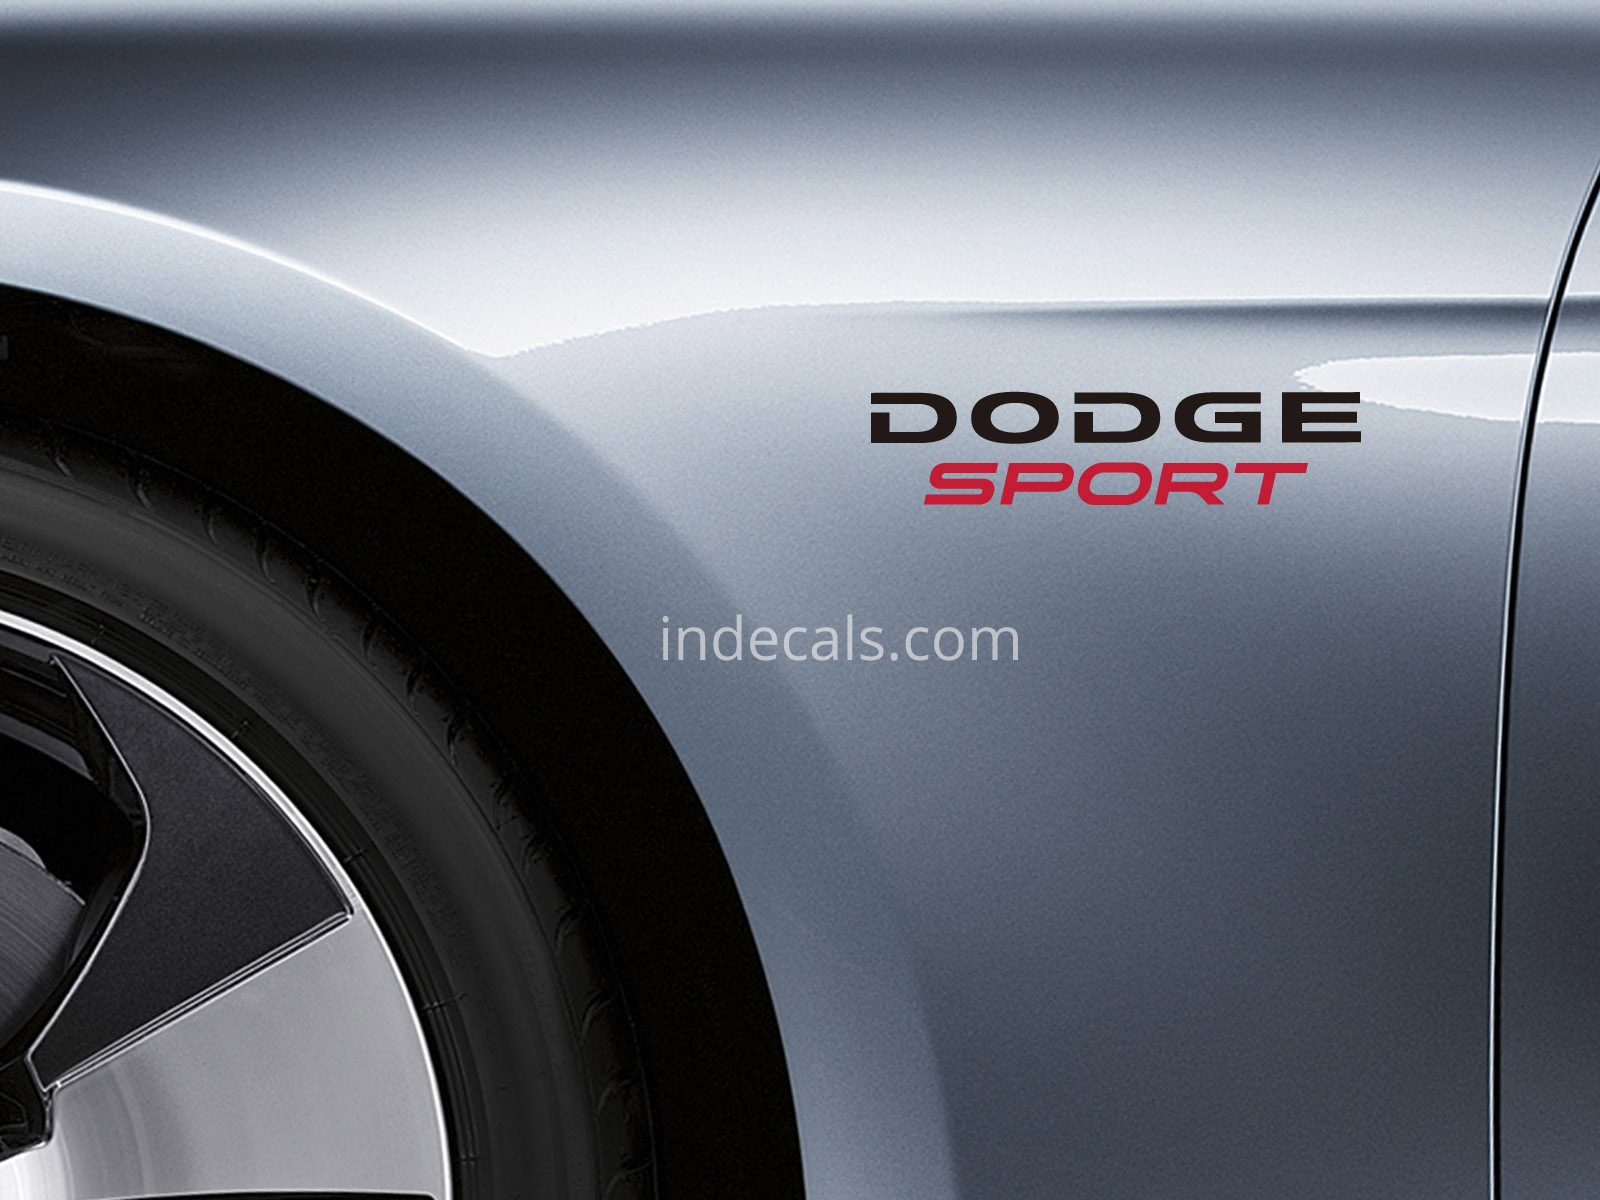 2 x Dodge Sports stickers for Wings - Black & Red